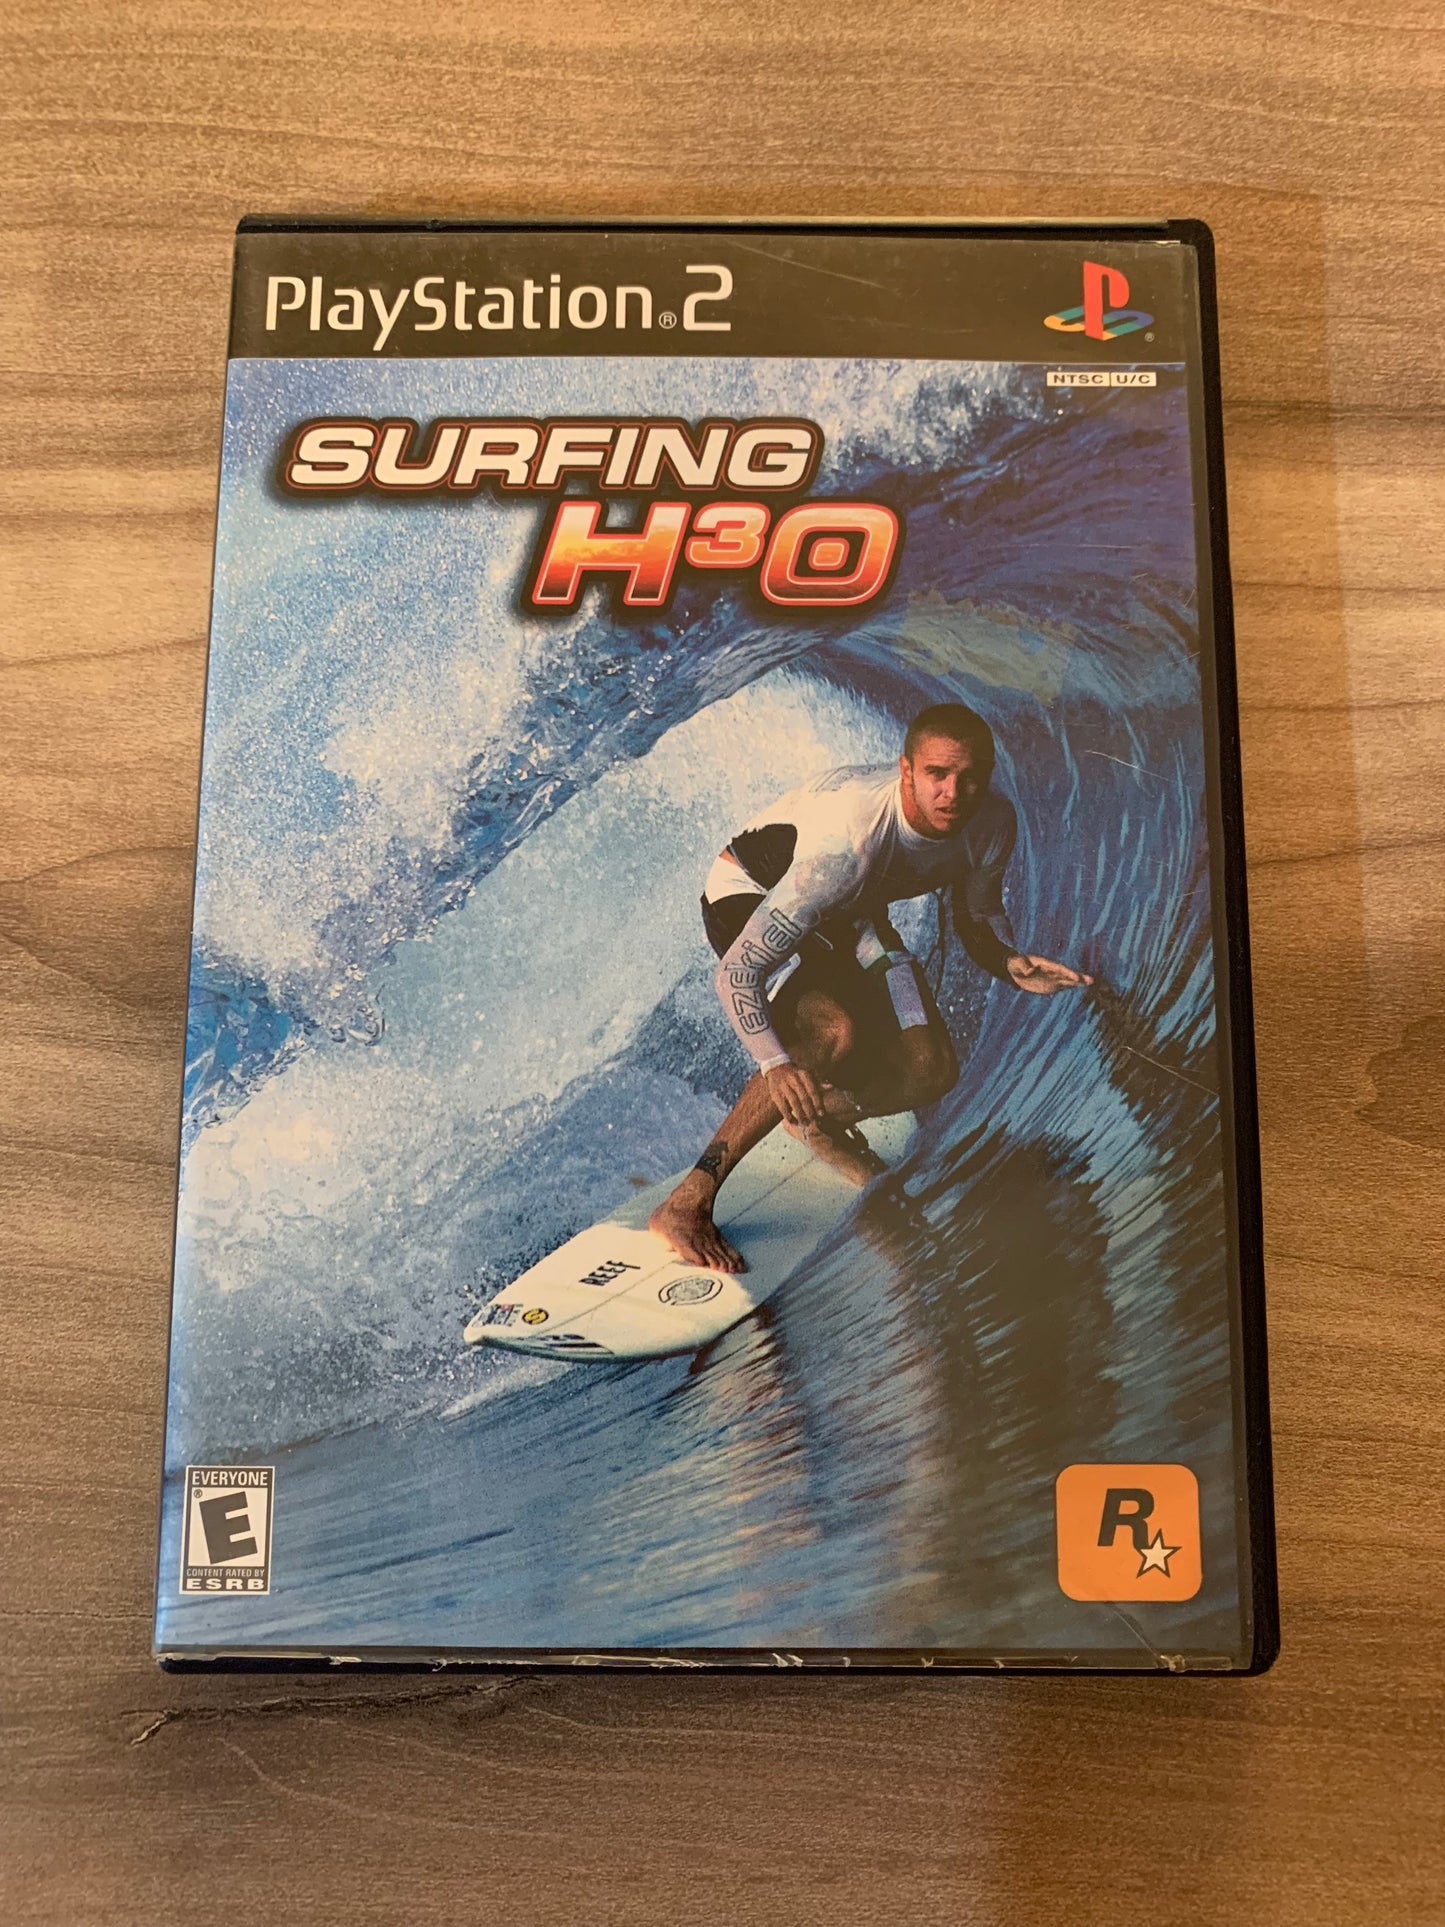 SONY PLAYSTATiON 2 [PS2] | SURFiNG H3O H30